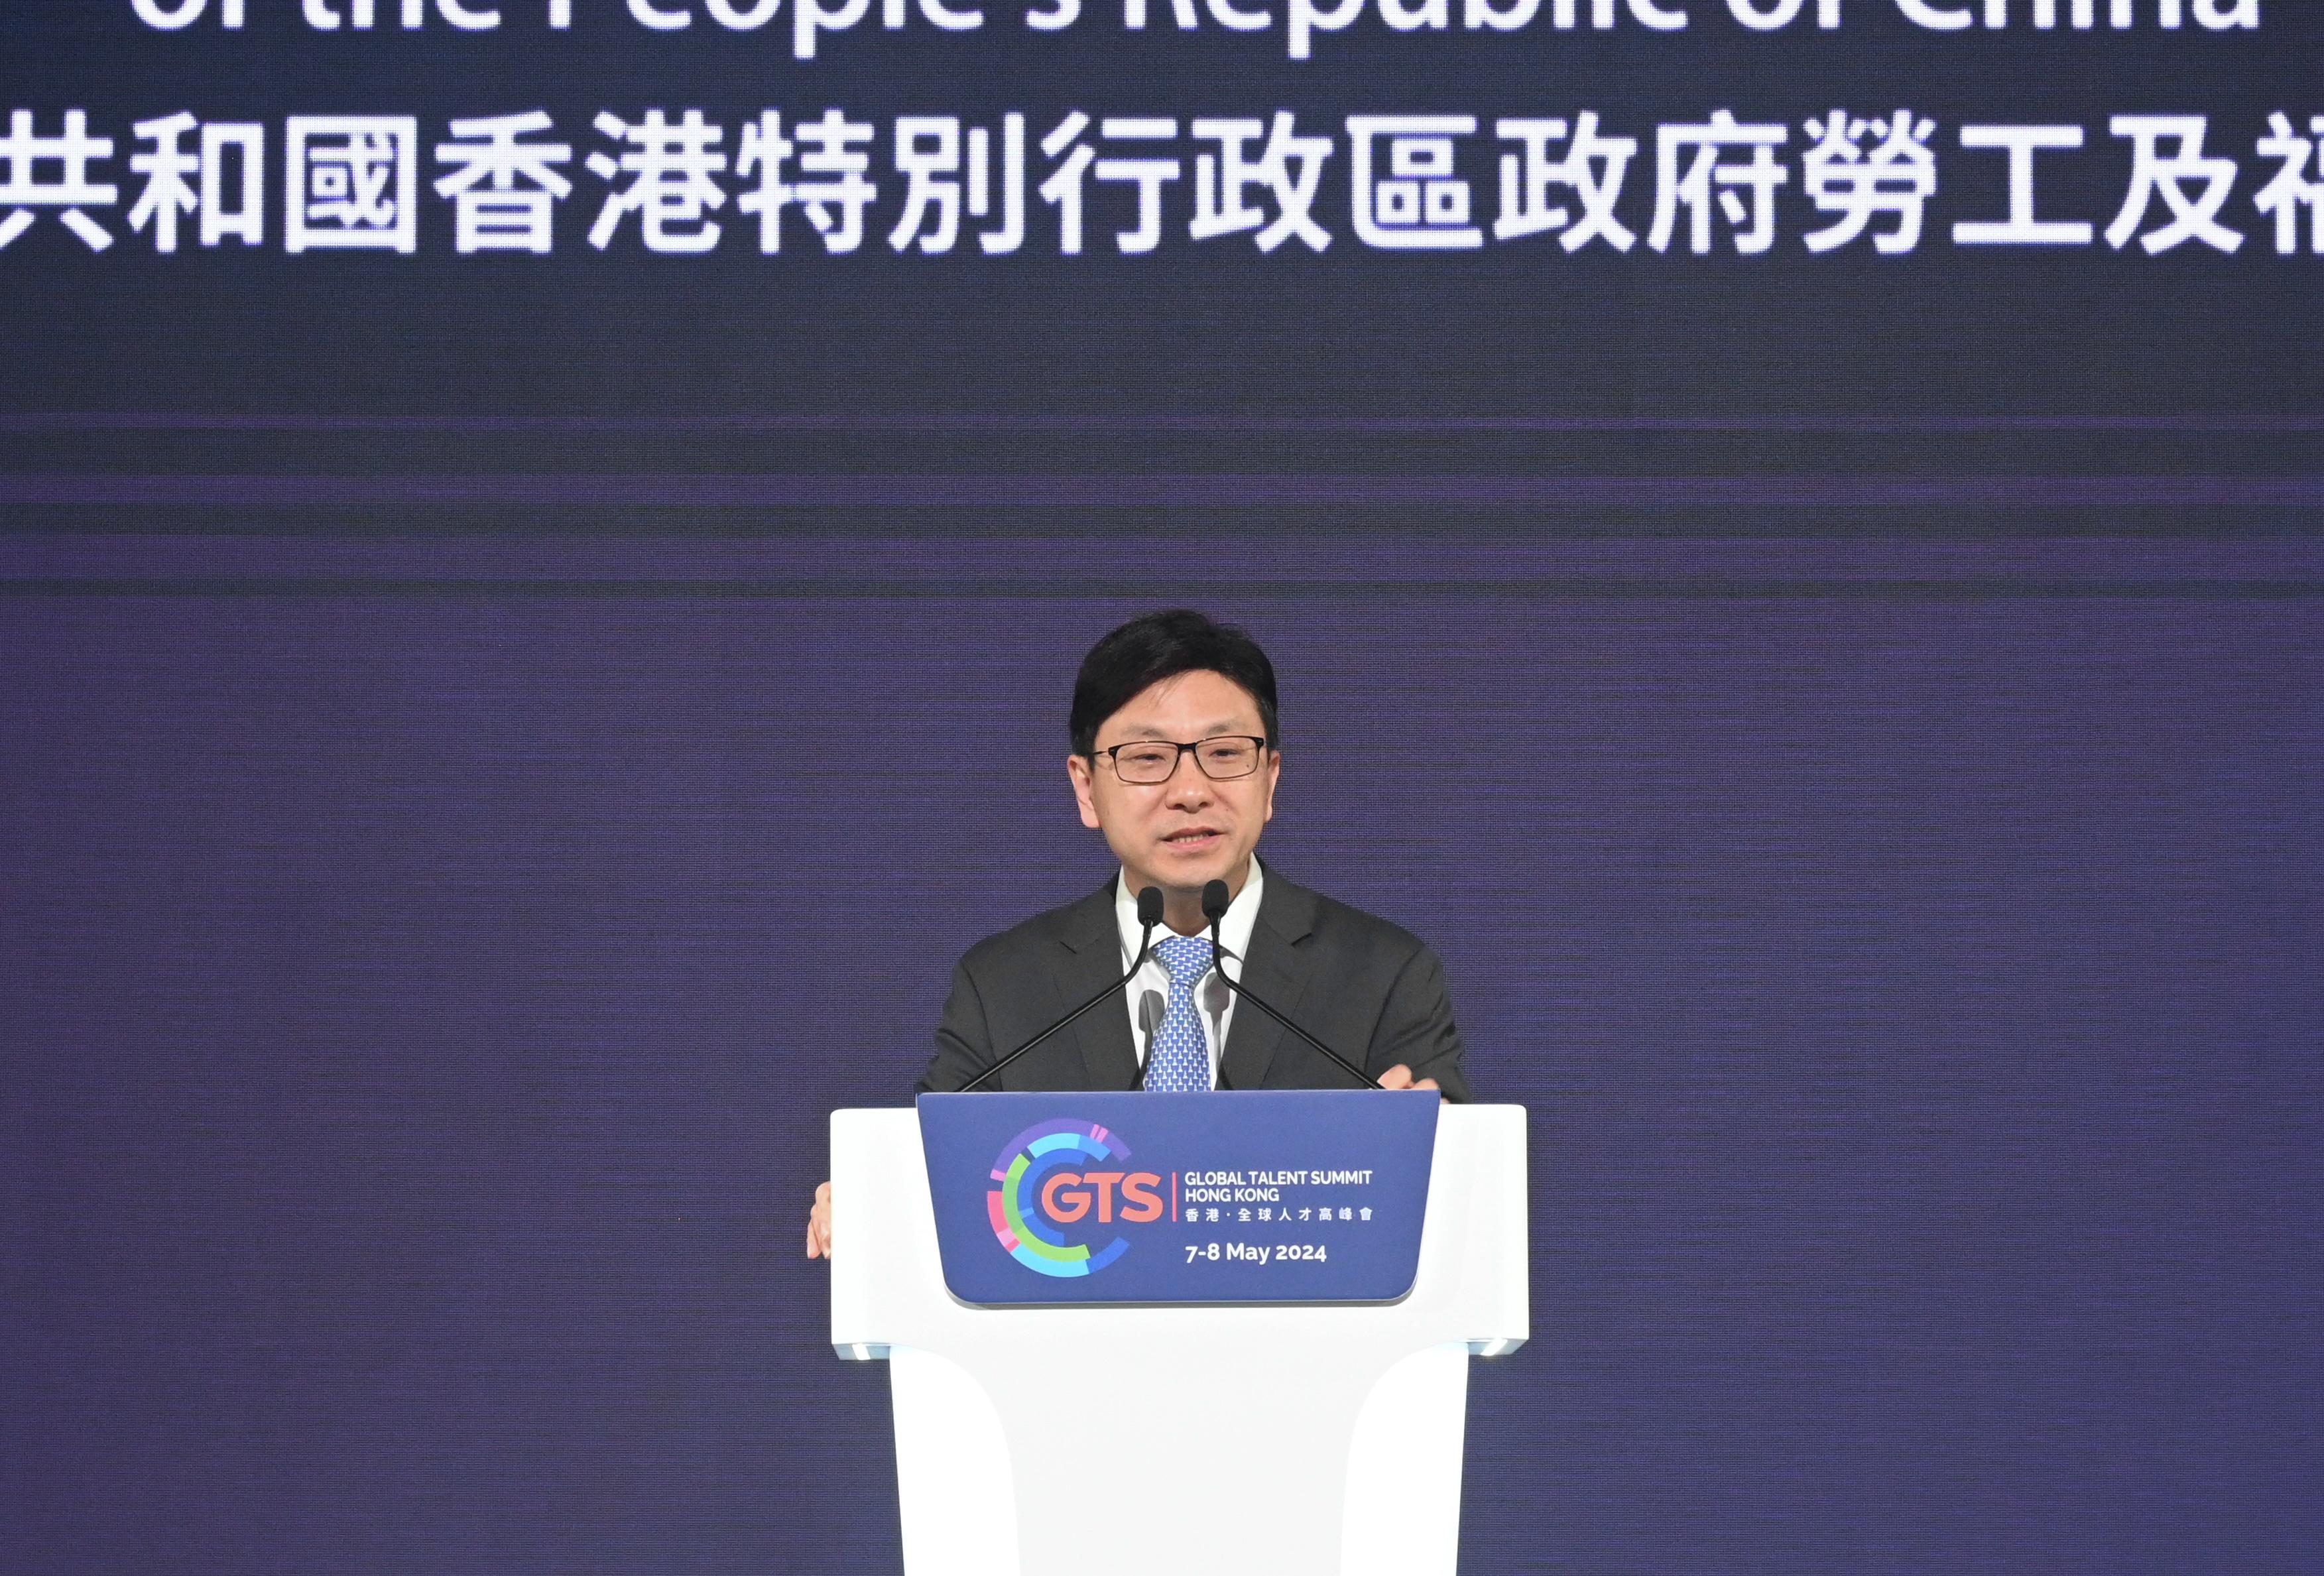 The Second Guangdong-Hong Kong-Macao Greater Bay Area (GBA) High-quality Talent Development Conference jointly organised by Guangdong, Hong Kong and Macao was held in Hong Kong today (May 8), with an aim to promote the building of a talent hub in the GBA, and strengthen talent development and tripartite co-operation. Photo shows the Secretary for Labour and Welfare, Mr Chris Sun, speaking at the Conference.